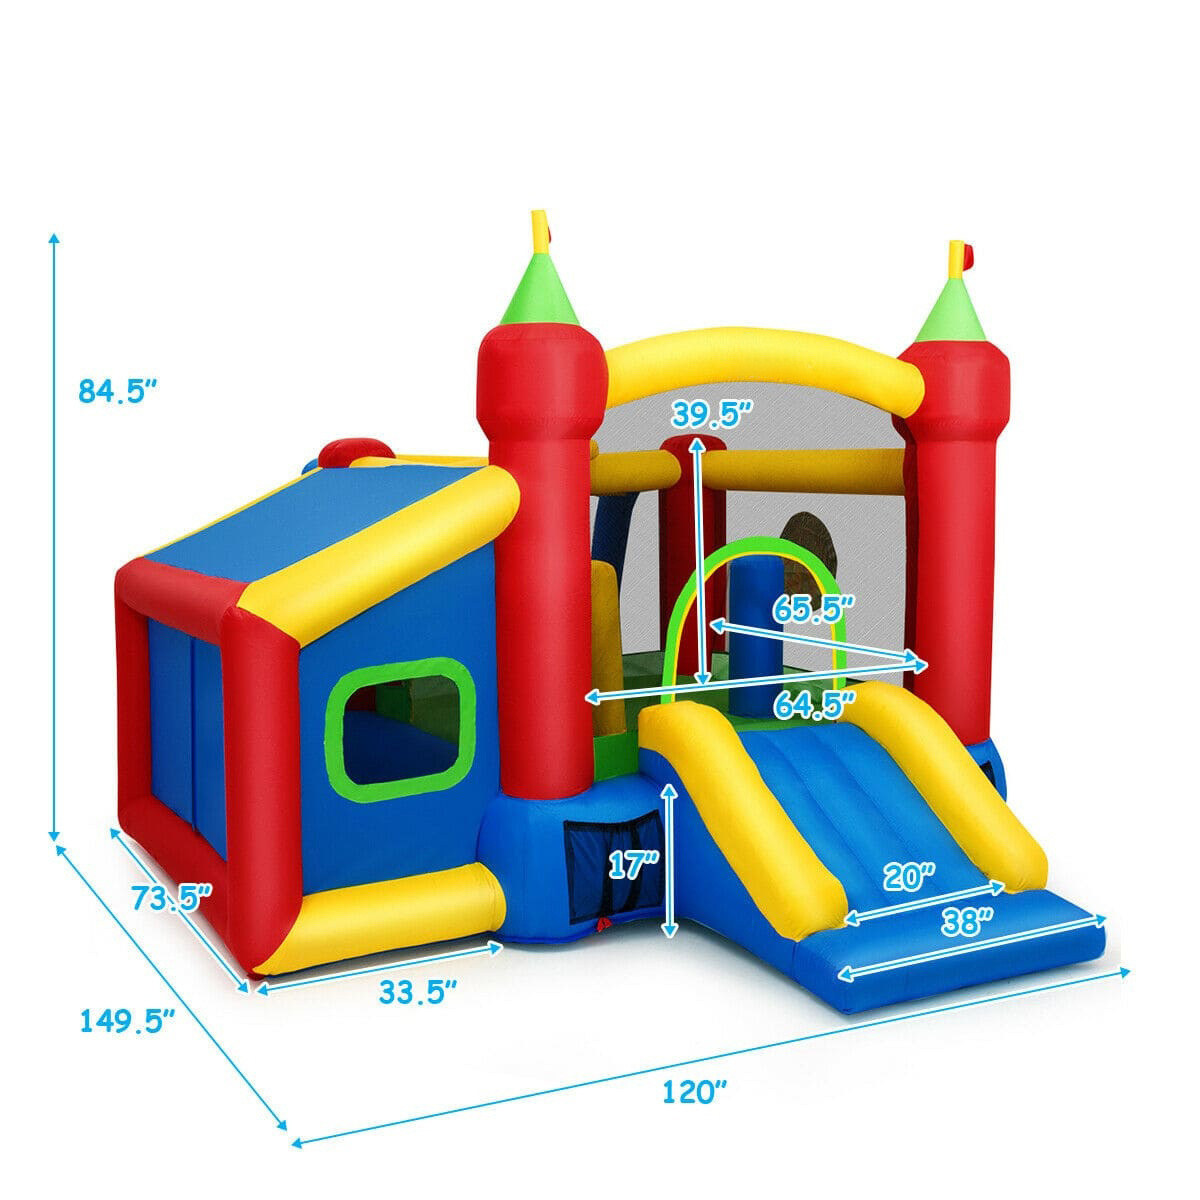 Colorful Kids Inflatable Bounce House with 480W Blower and Plastic Balls